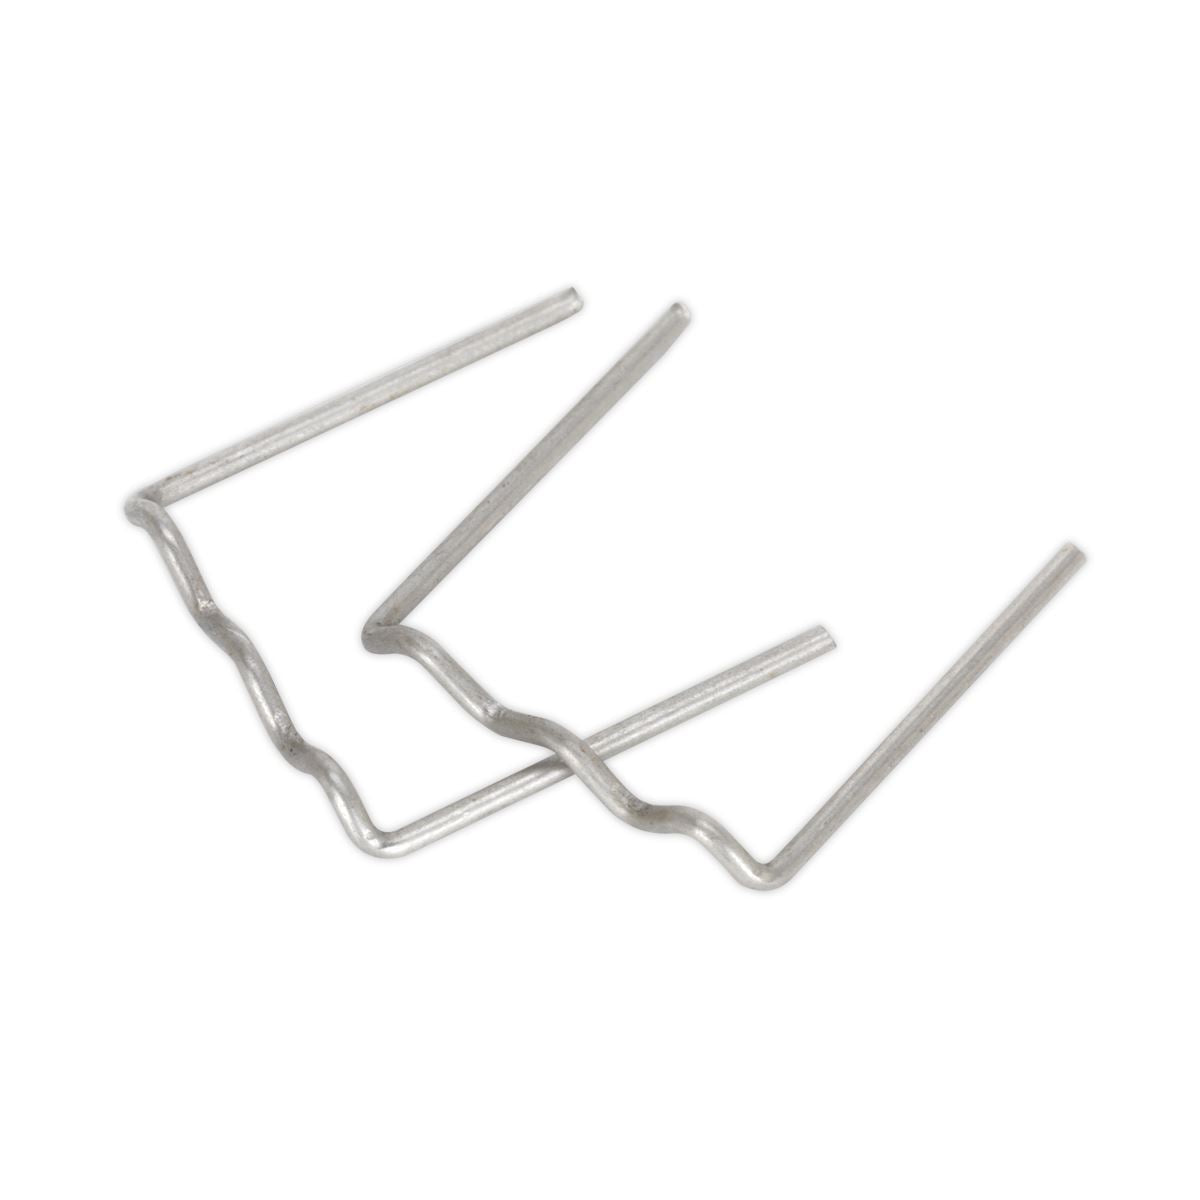 Sealey Flat Staple 0.8mm Pack of 100